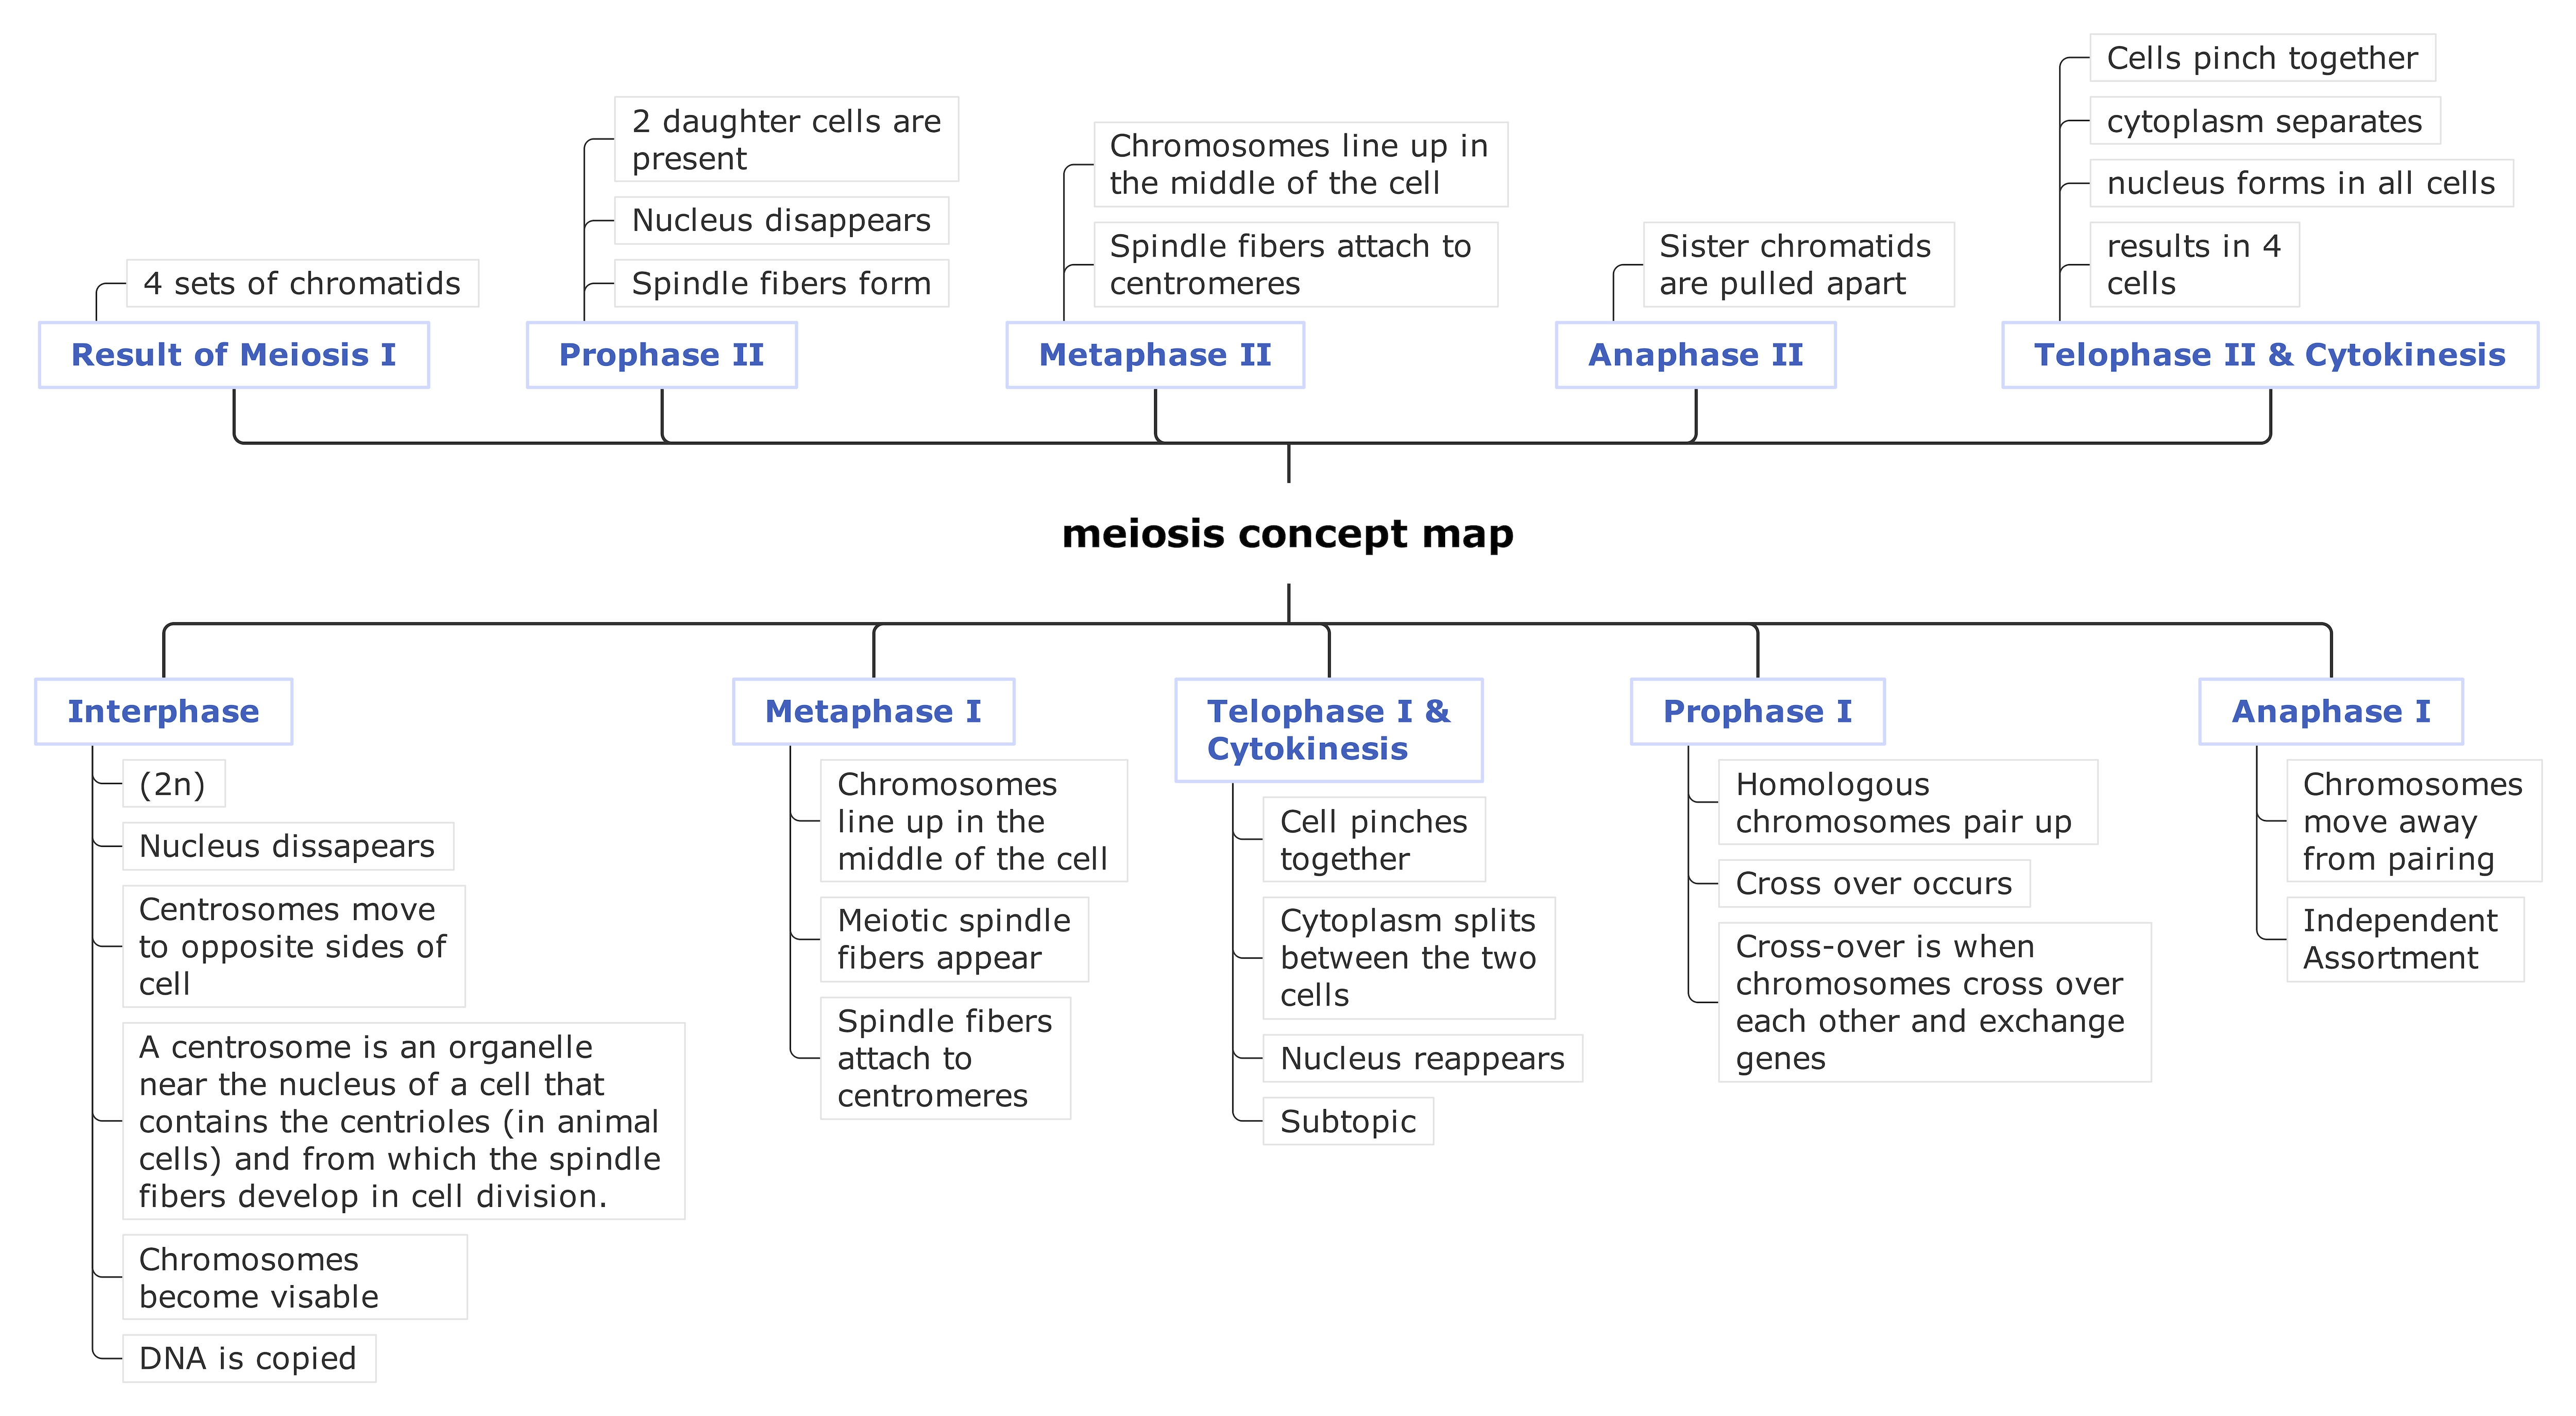 example 2 of meiosis concept map